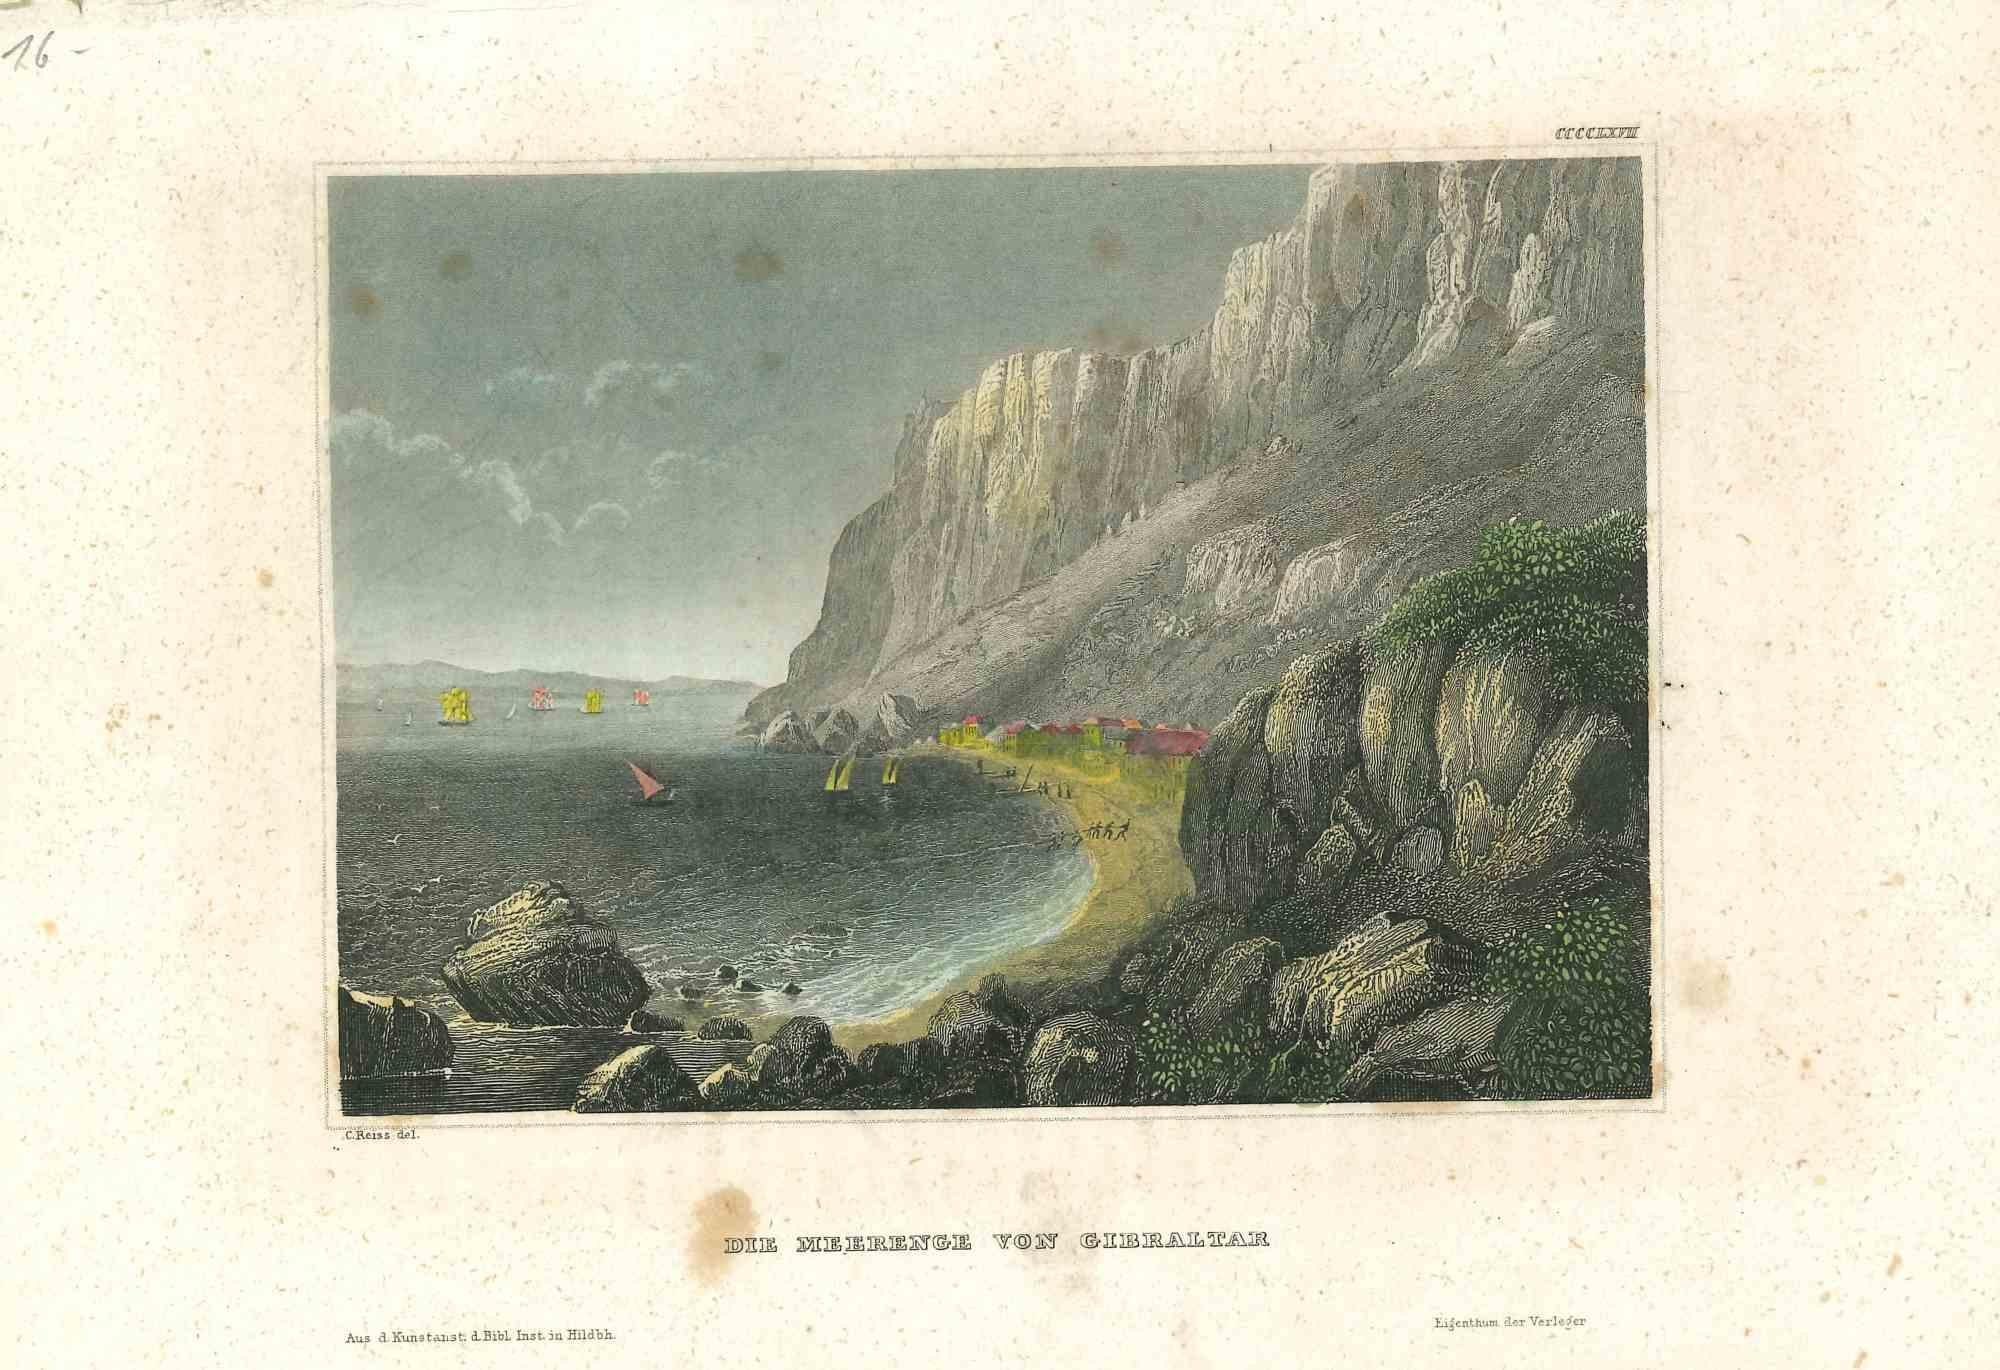 Unknown Landscape Print - Ancient View of The Strait of Gibraltar - Original Lithograph - Mid-19th Century